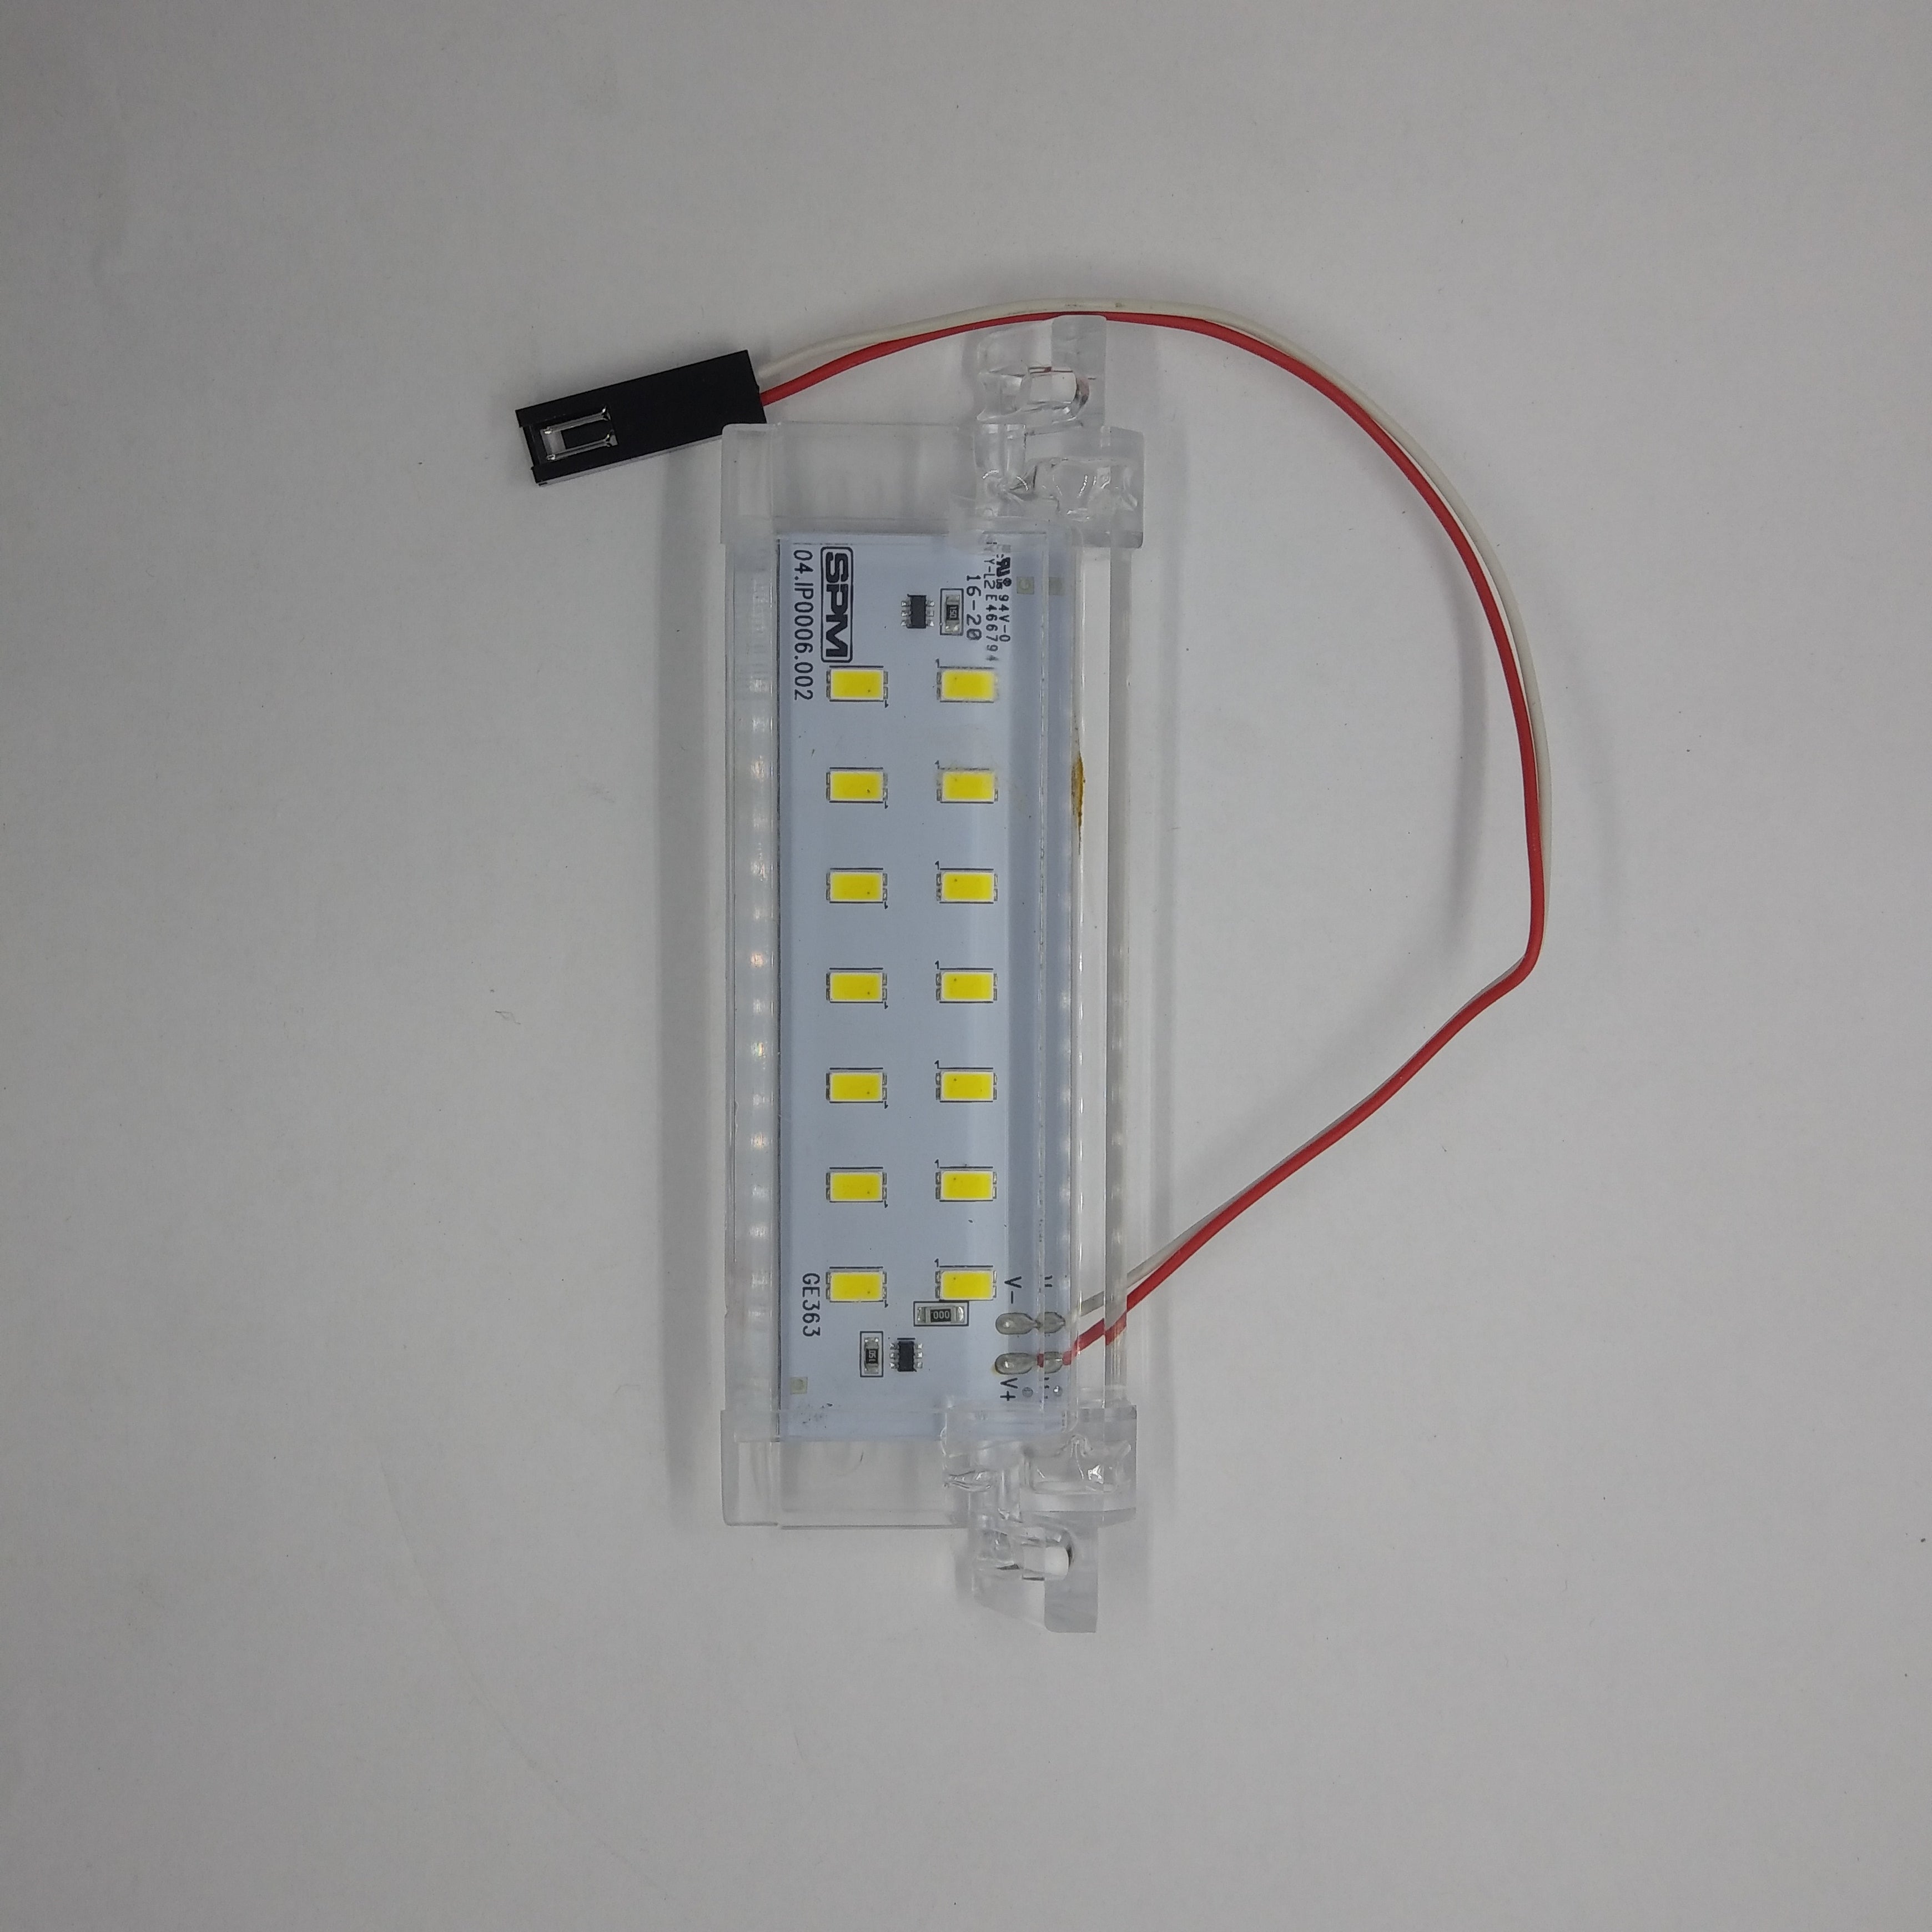 RSPM043  I-PRO LED LAMP WITH WIRING / EX PART: 14 /    #04.IP0006.002